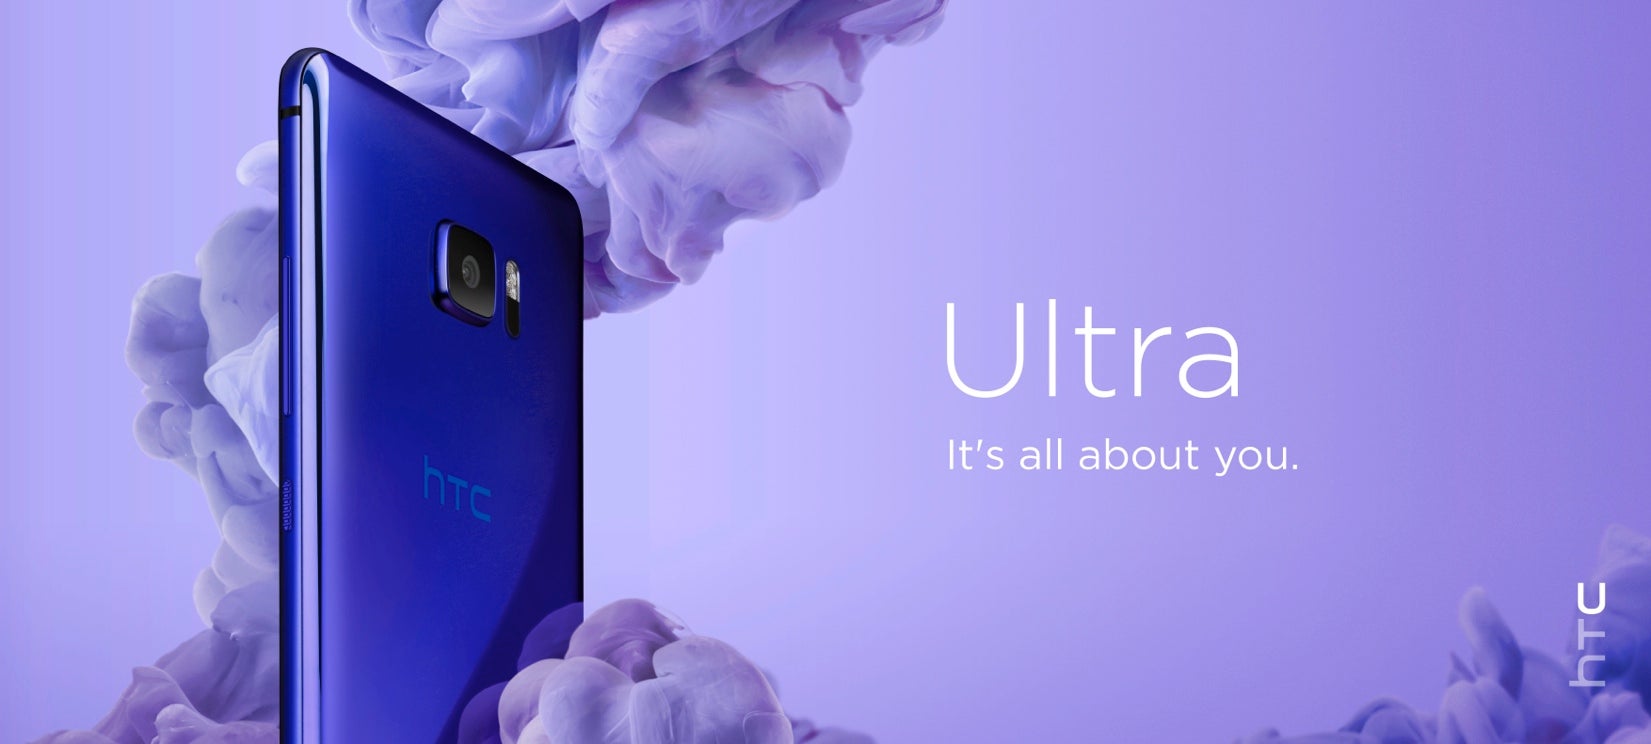 The HTC U Ultra with a sapphire finish will first be available for pre-order in mid-February in Taiwan